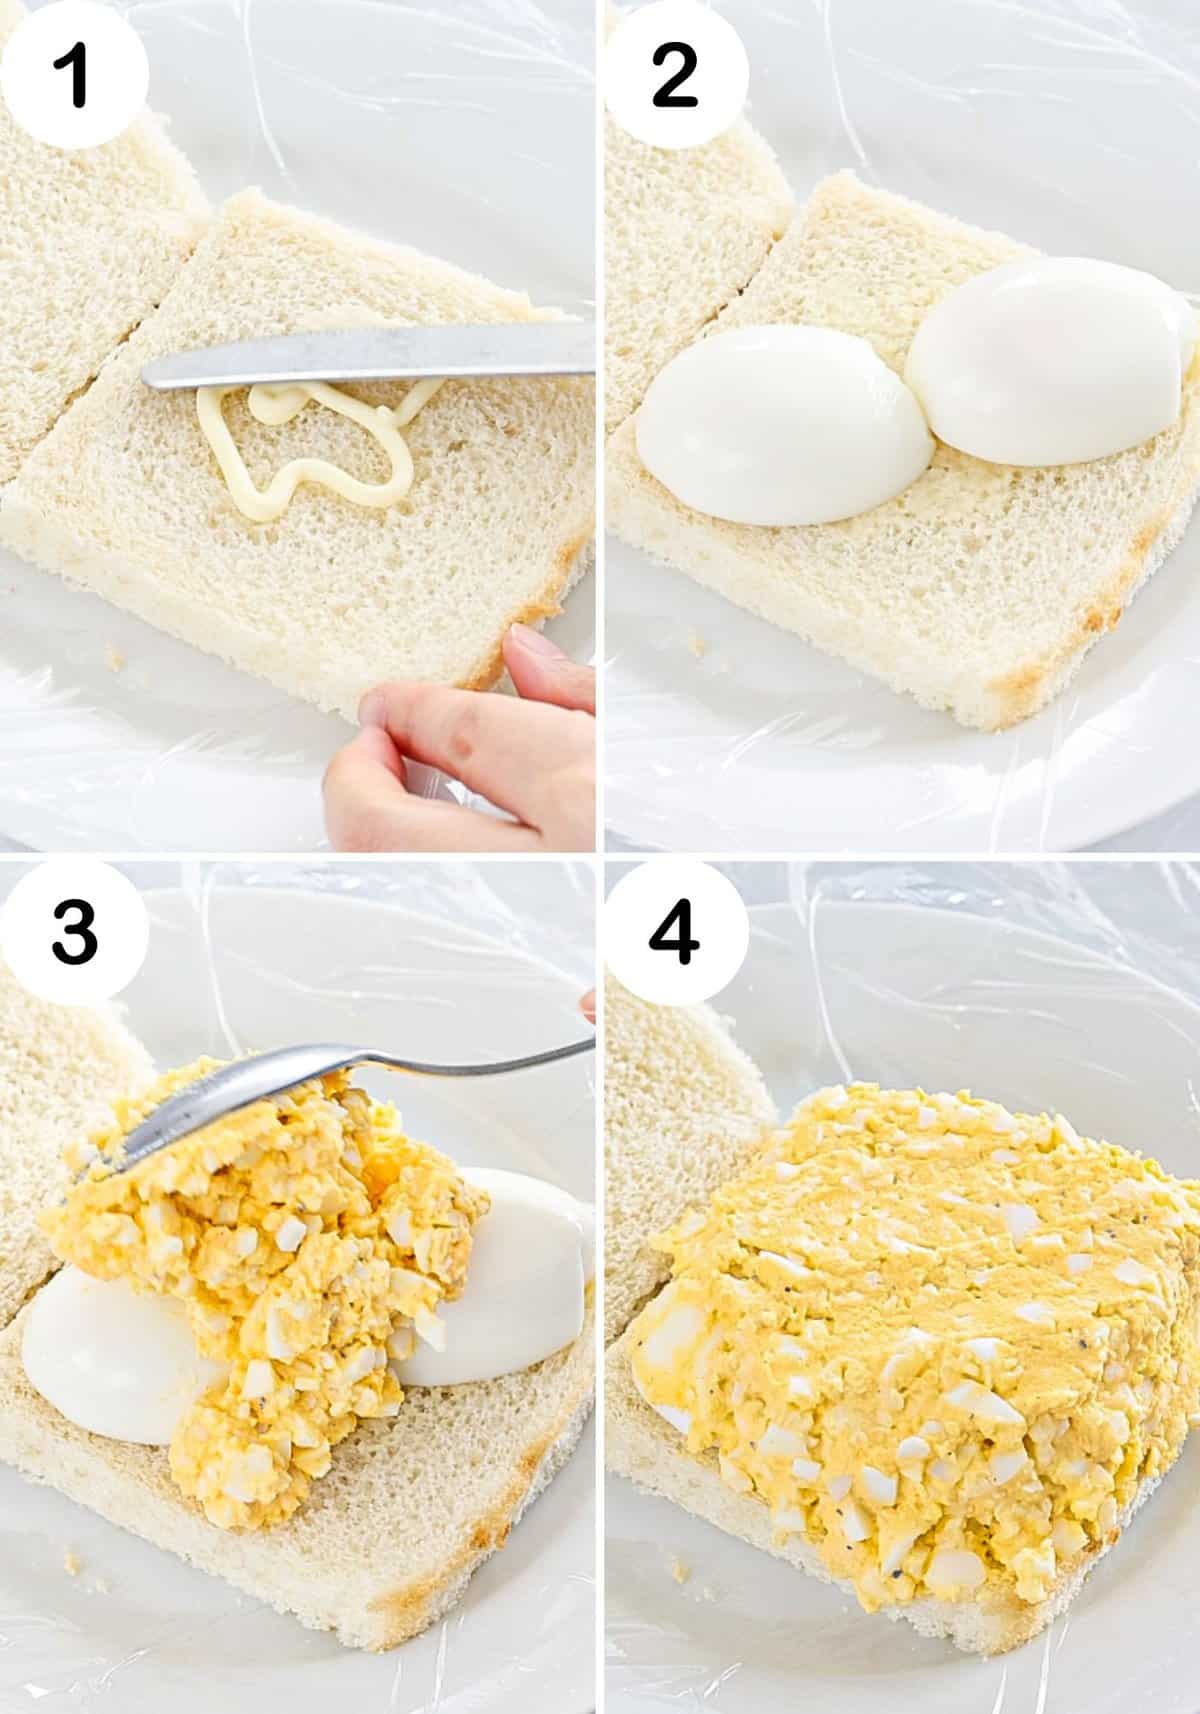 Step by step photos for how to make a Japanese egg sandwich.